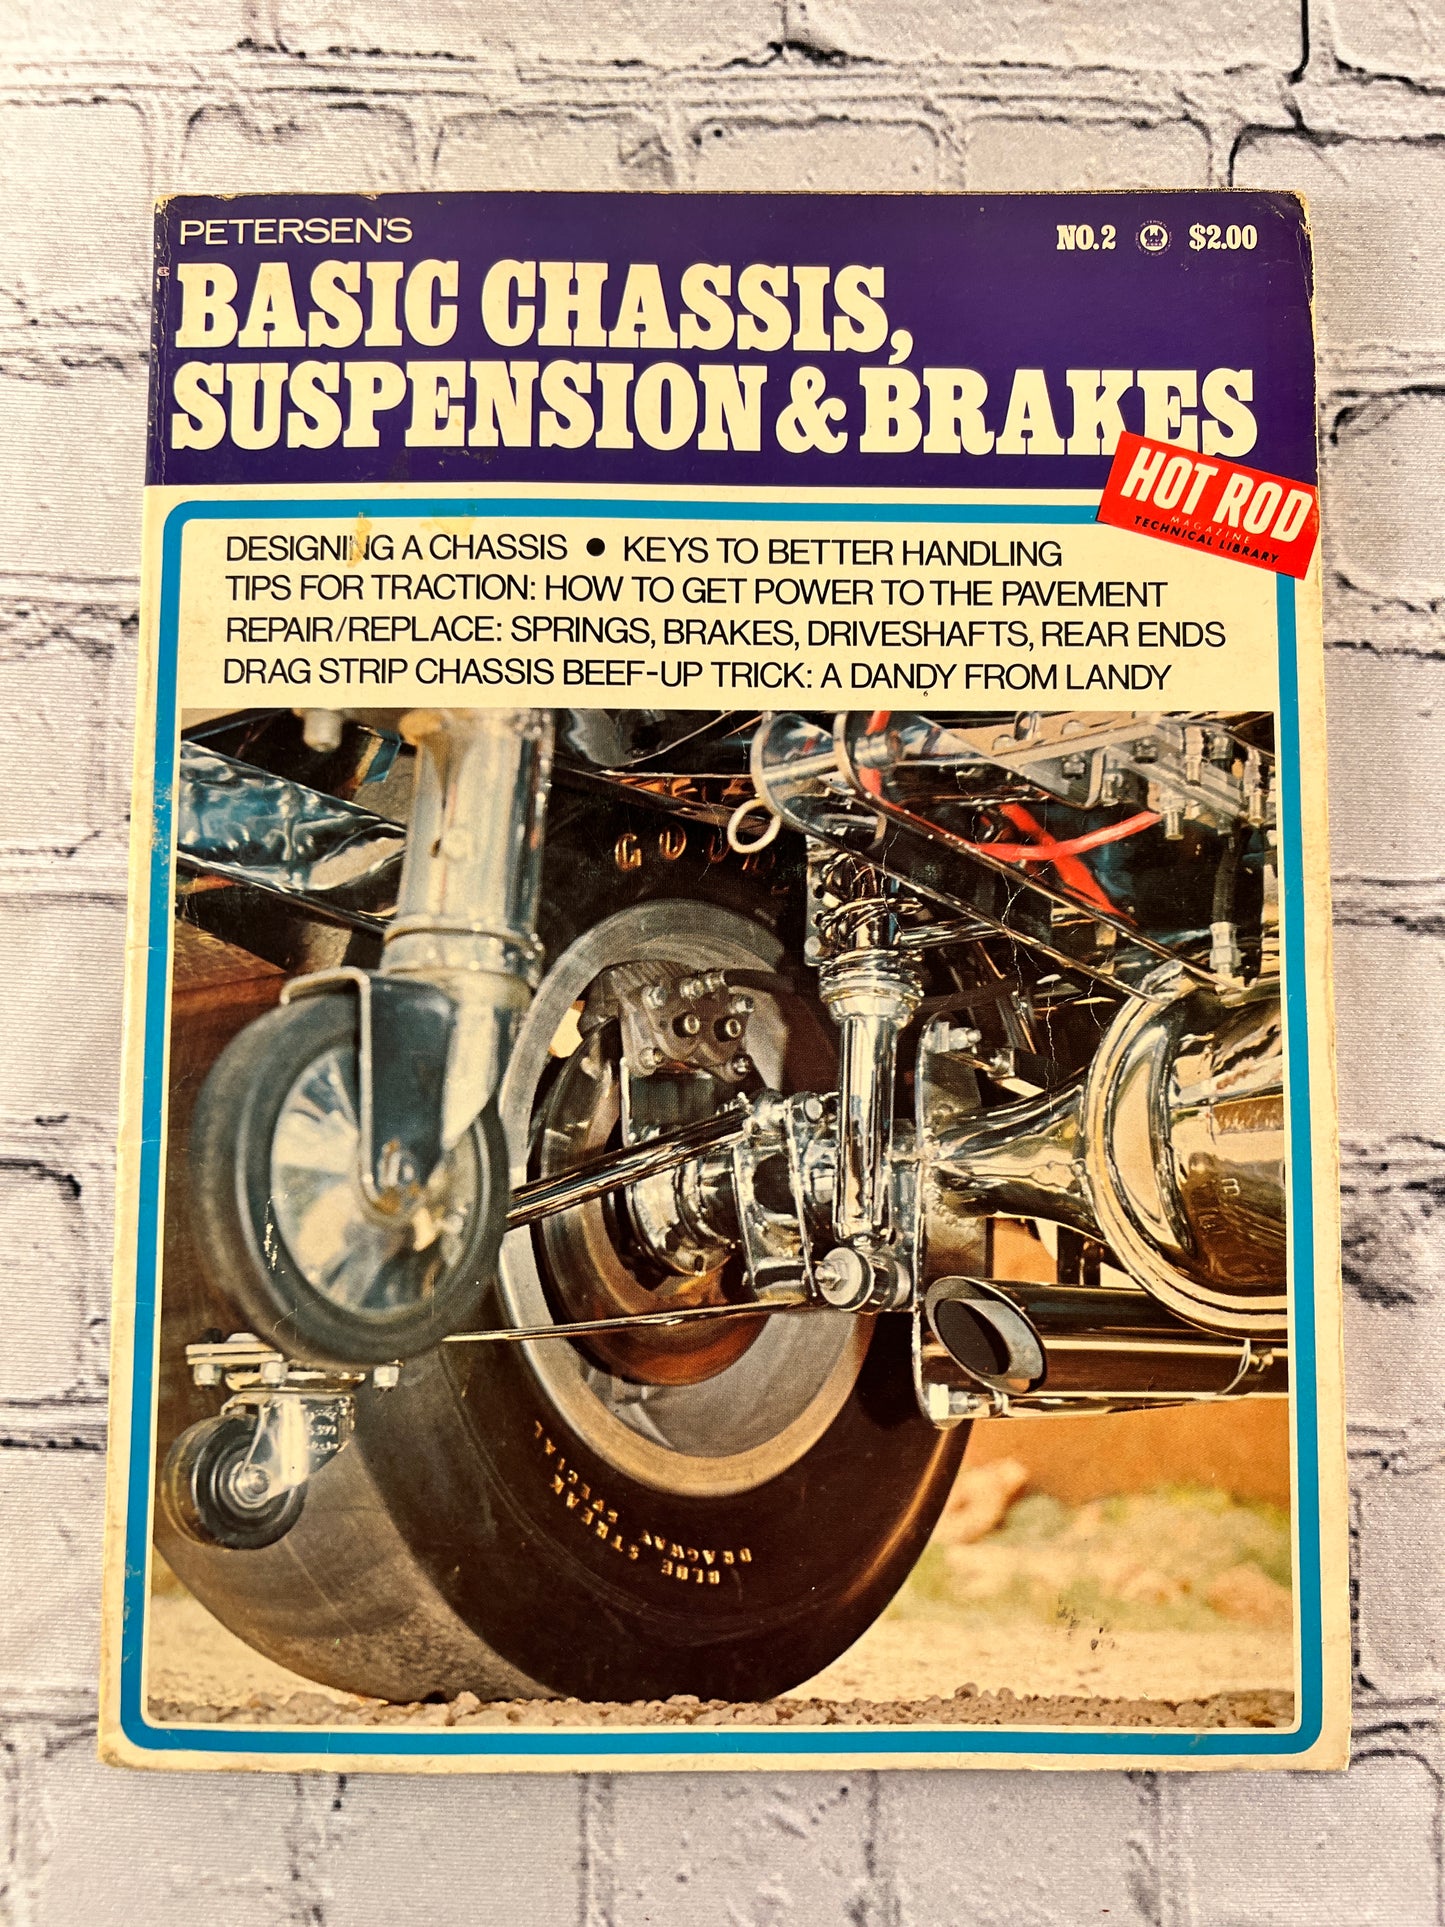 Petersen's Basic Chassis, Suspension & Brakes no. 2 [1971]